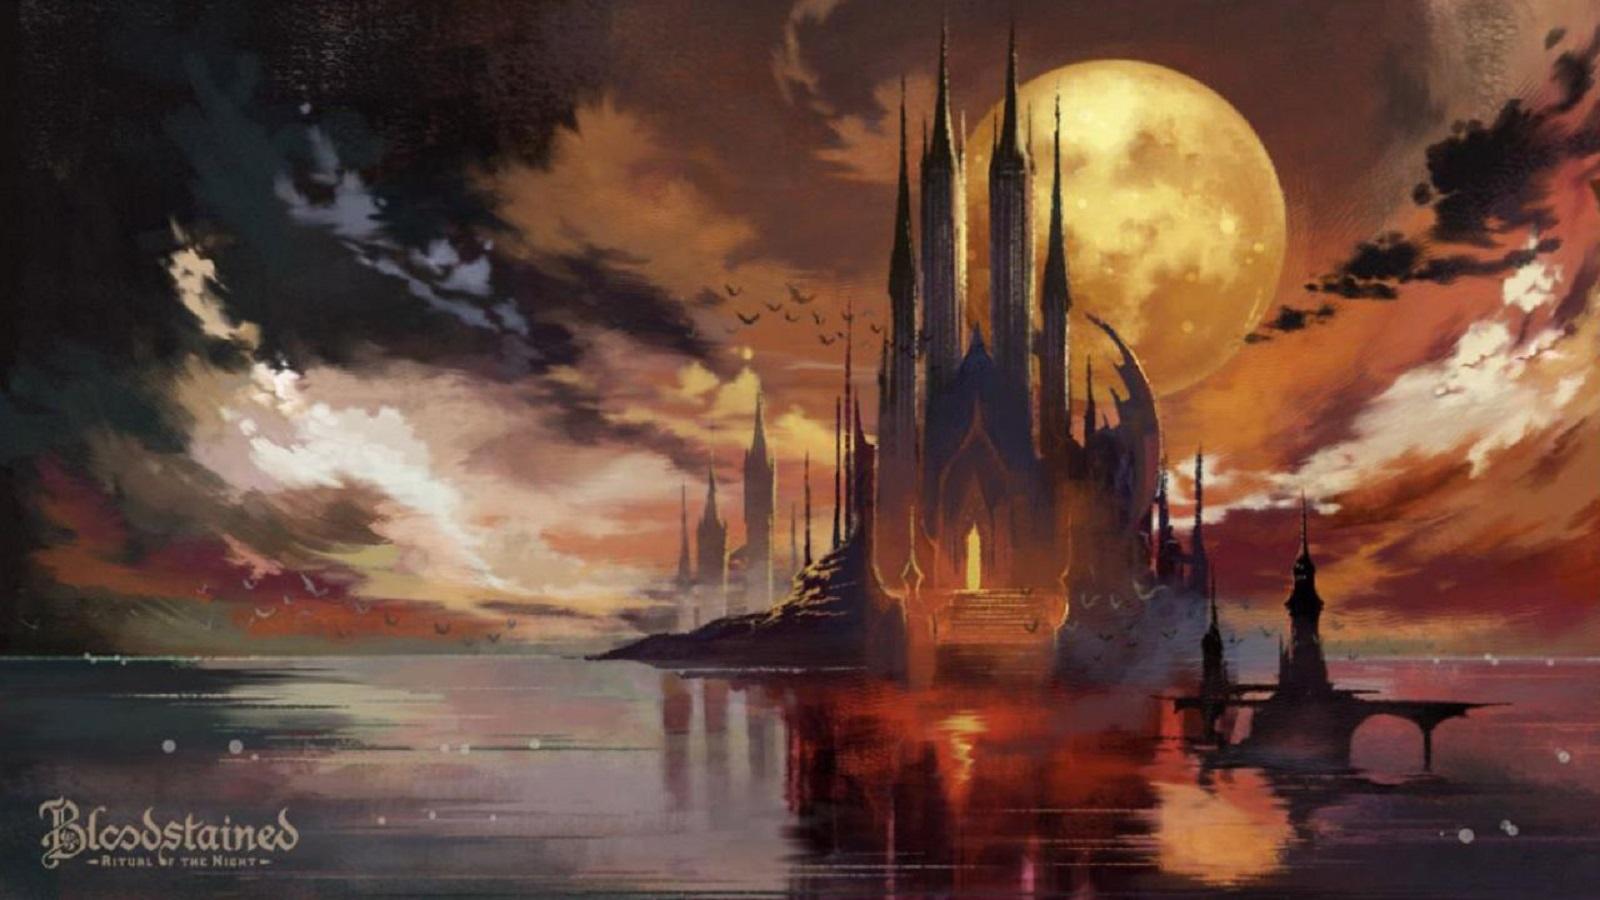 Bloodstained: Ritual of the Night Announced by Castlevania Creator